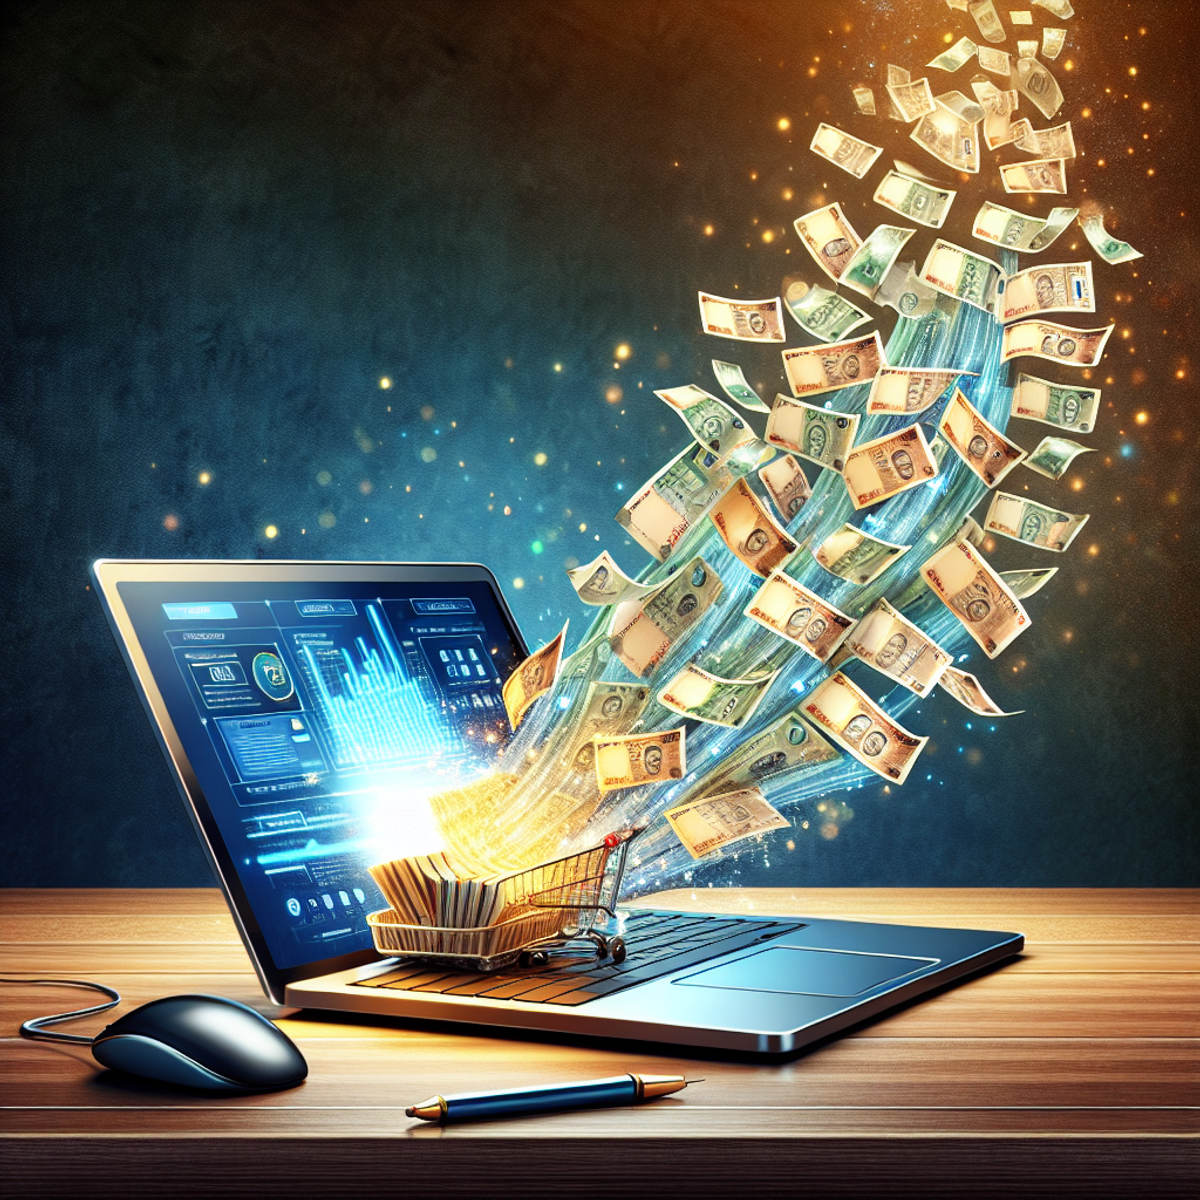 Alt text: A laptop with a brightly lit screen displaying a torrent of Indian currency notes cascading onto a wooden desk, symbolizing potential earnings from affiliate marketing. Surrounding the laptop are subtle symbols of ecommerce such as a small shopping cart and a mouse pointer.